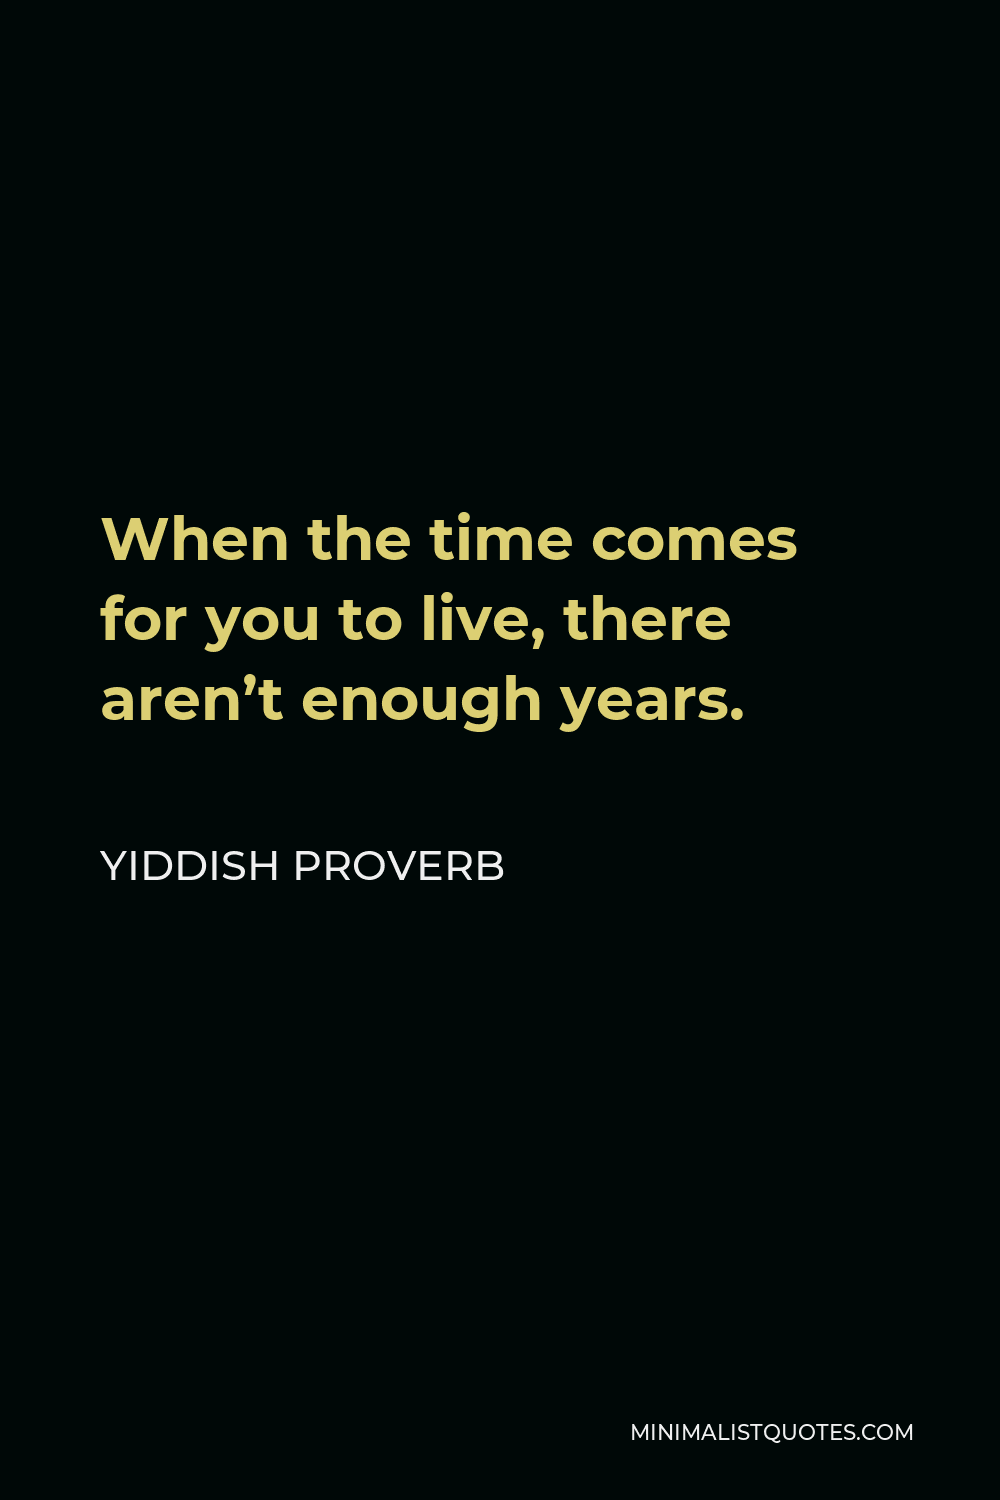 Yiddish Proverb Quote - When the time comes for you to live, there aren’t enough years.